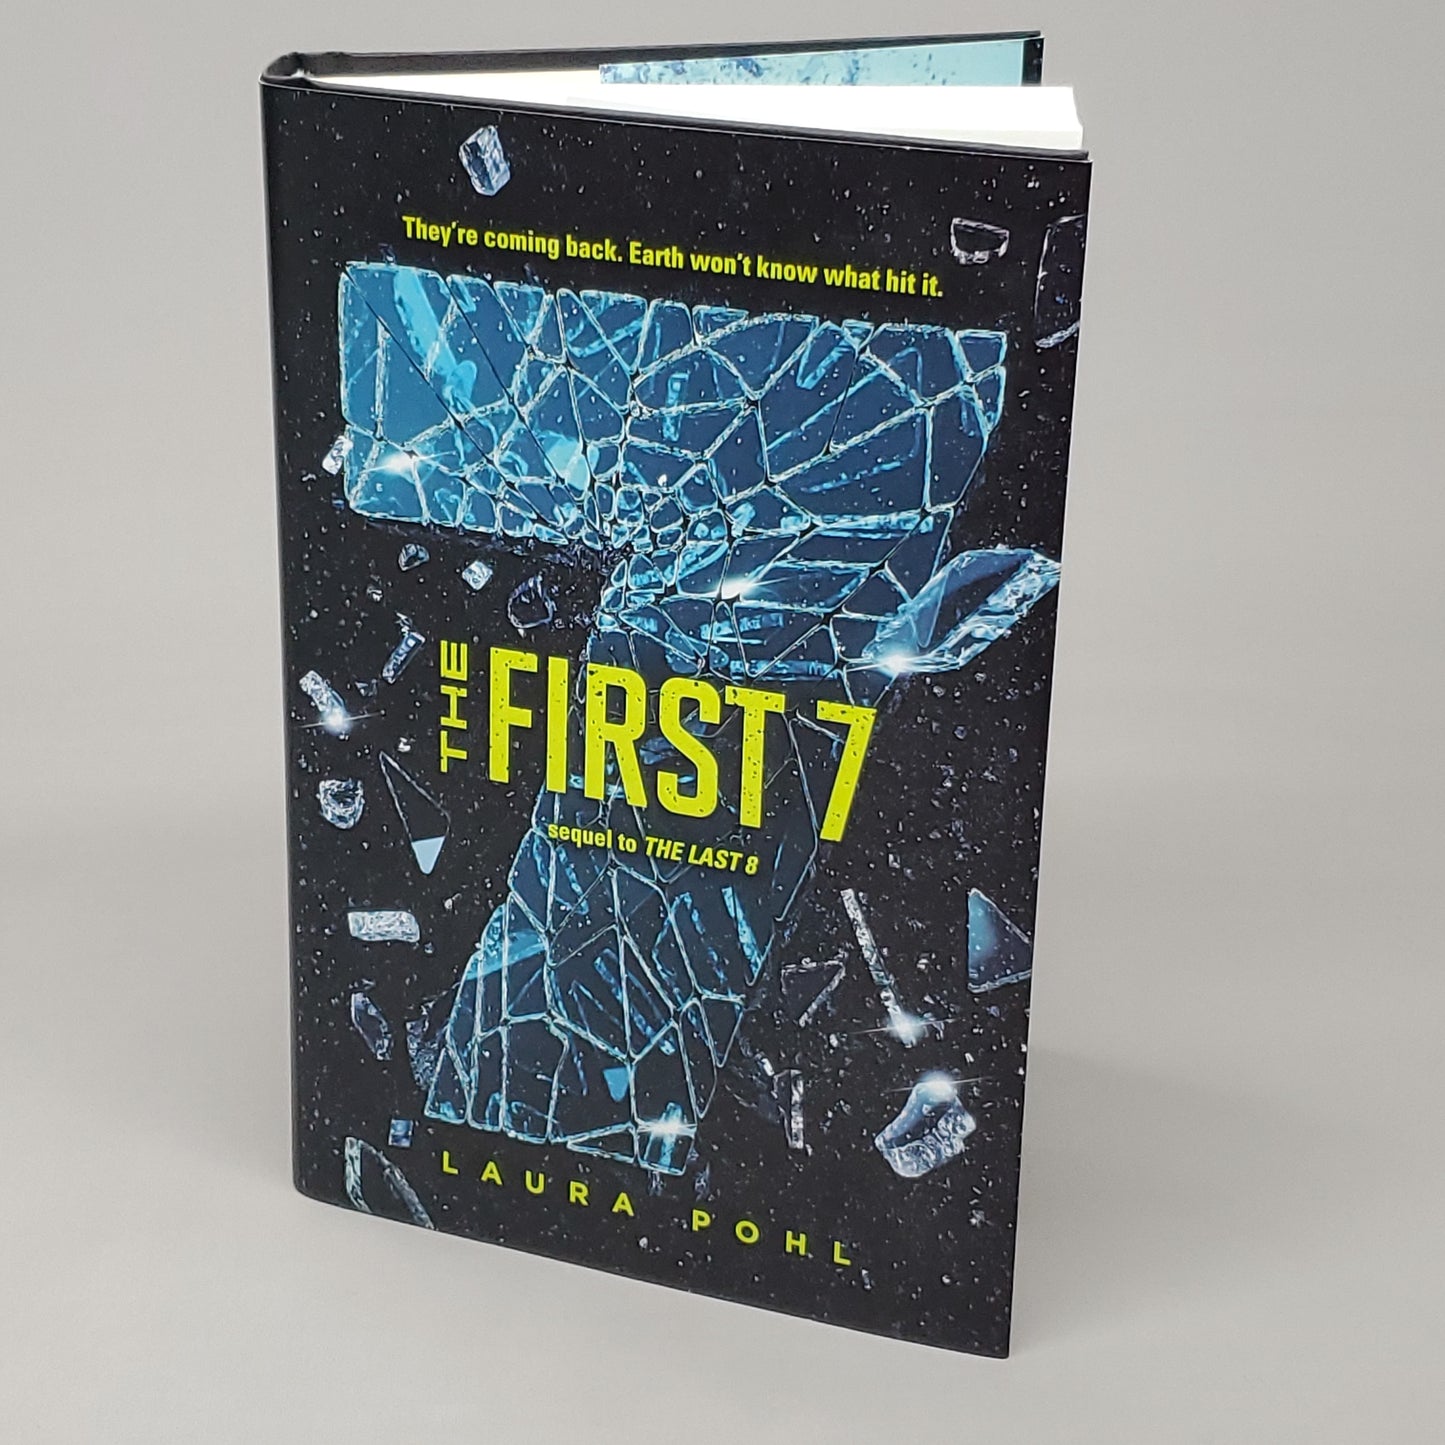 THE FIRST 7 by Laura Pohl Book Hardback (New)